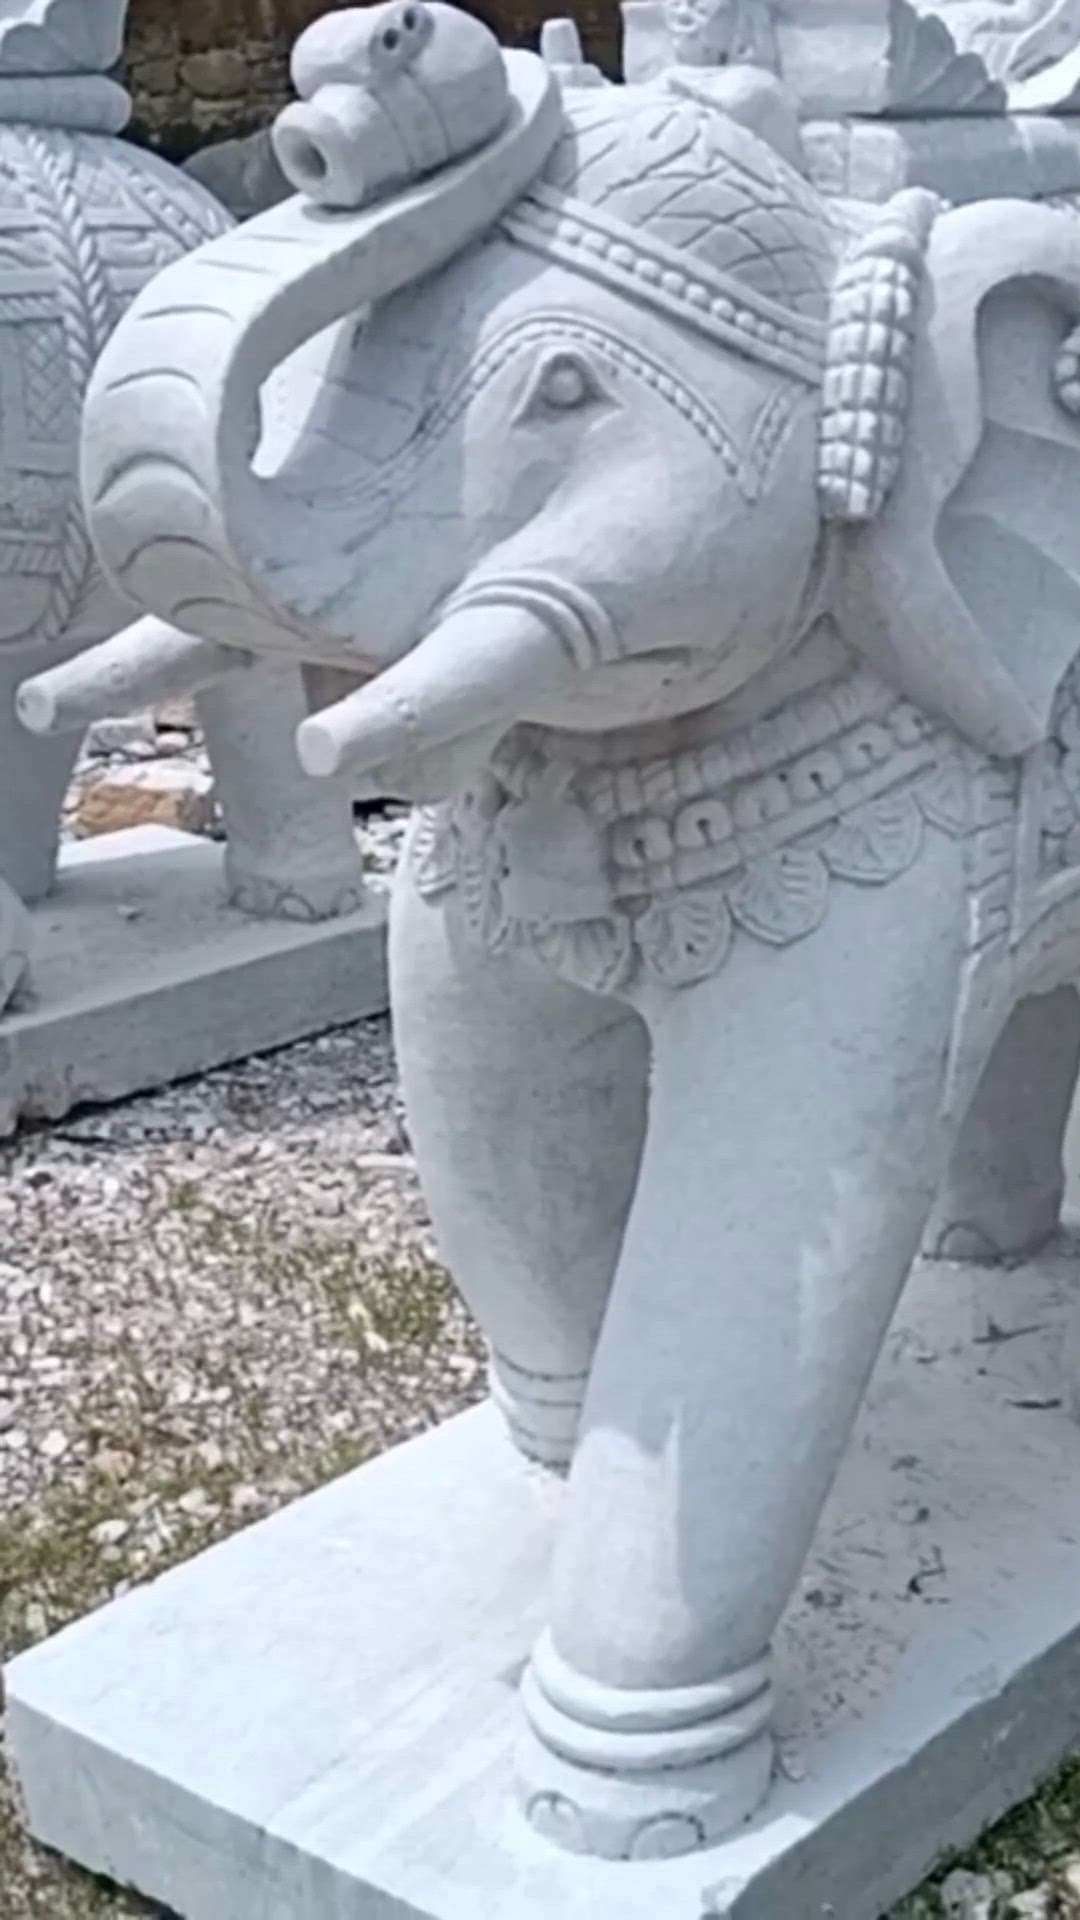 Marble Elephant Sculpture

Decor your home and temple with beautiful Marble Elephant Sculpture

We are manufacturer of marble and sandstone sculpture

We make any design according to your requirement and size

Follow me @nbmarble 

More information contact me
8233078099

#elephant #sculpture #marblesculptures #nbmarble #gardendesigner #marblesculpture #elephantsculpture #marbledesign #murtikar